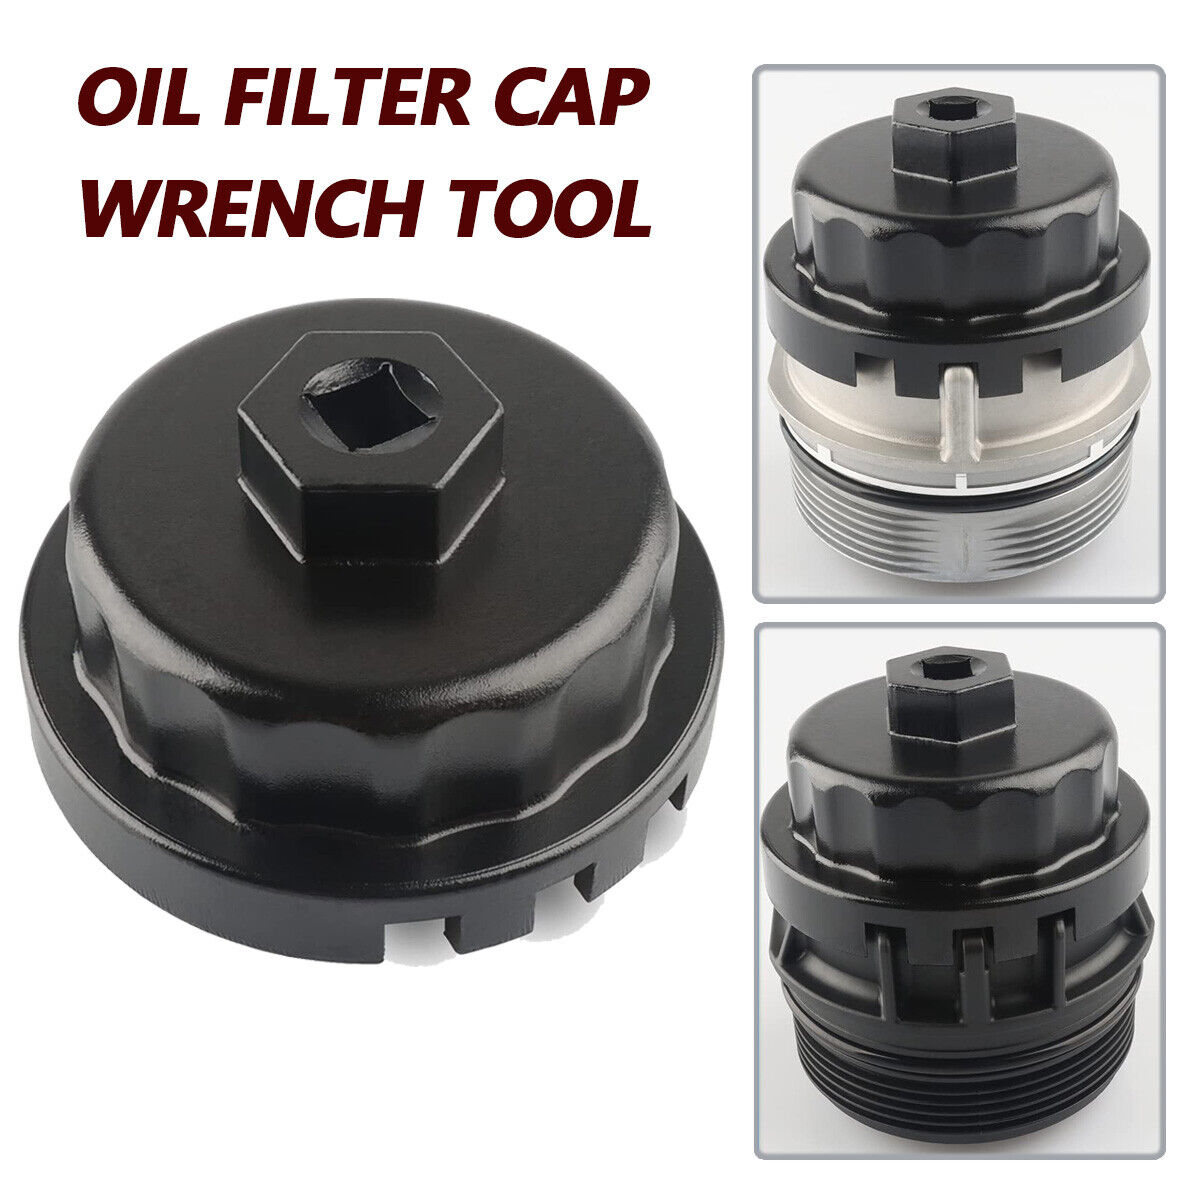 64mm Oil Filter Cap Wrench Socket Remover Tool for Toyota Lexus Scion 2.5L-5.7L